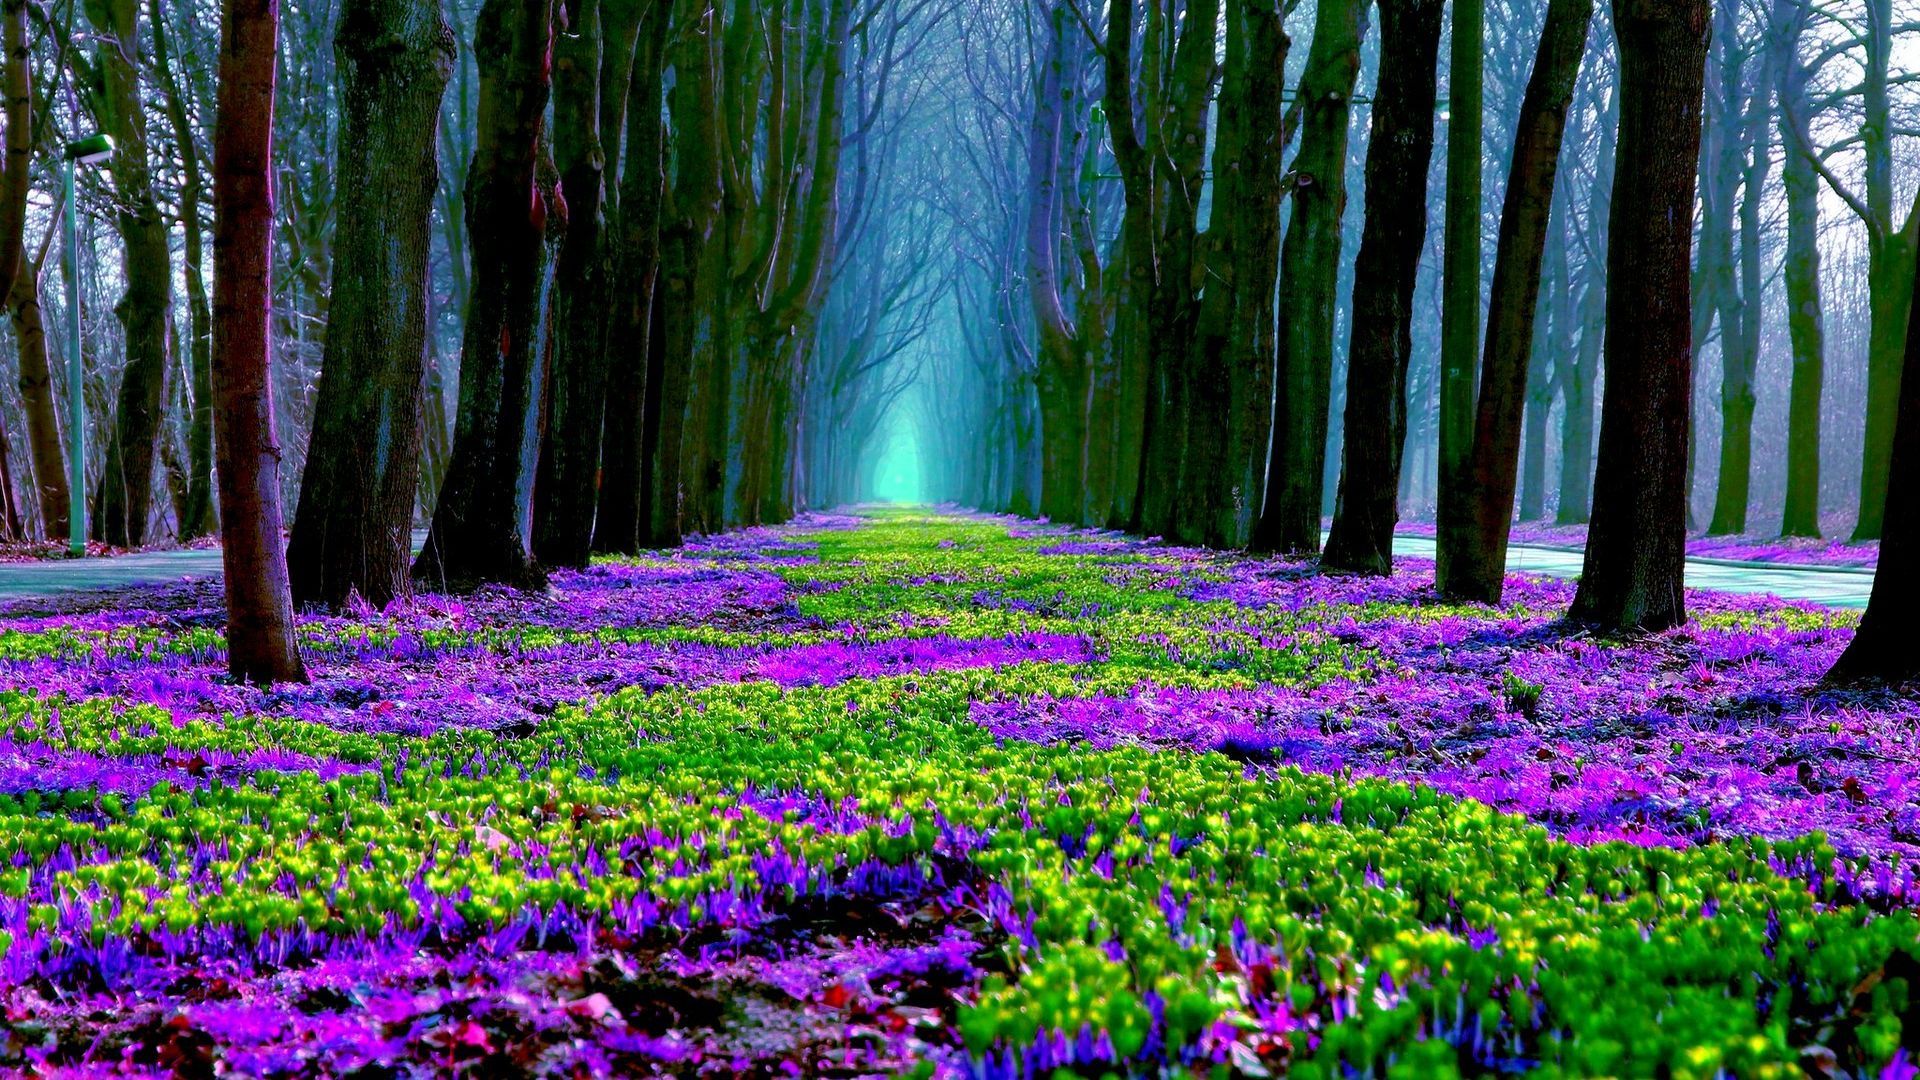 Forest Purple Flowers Spring Nature HD Wallpaper Free Photo